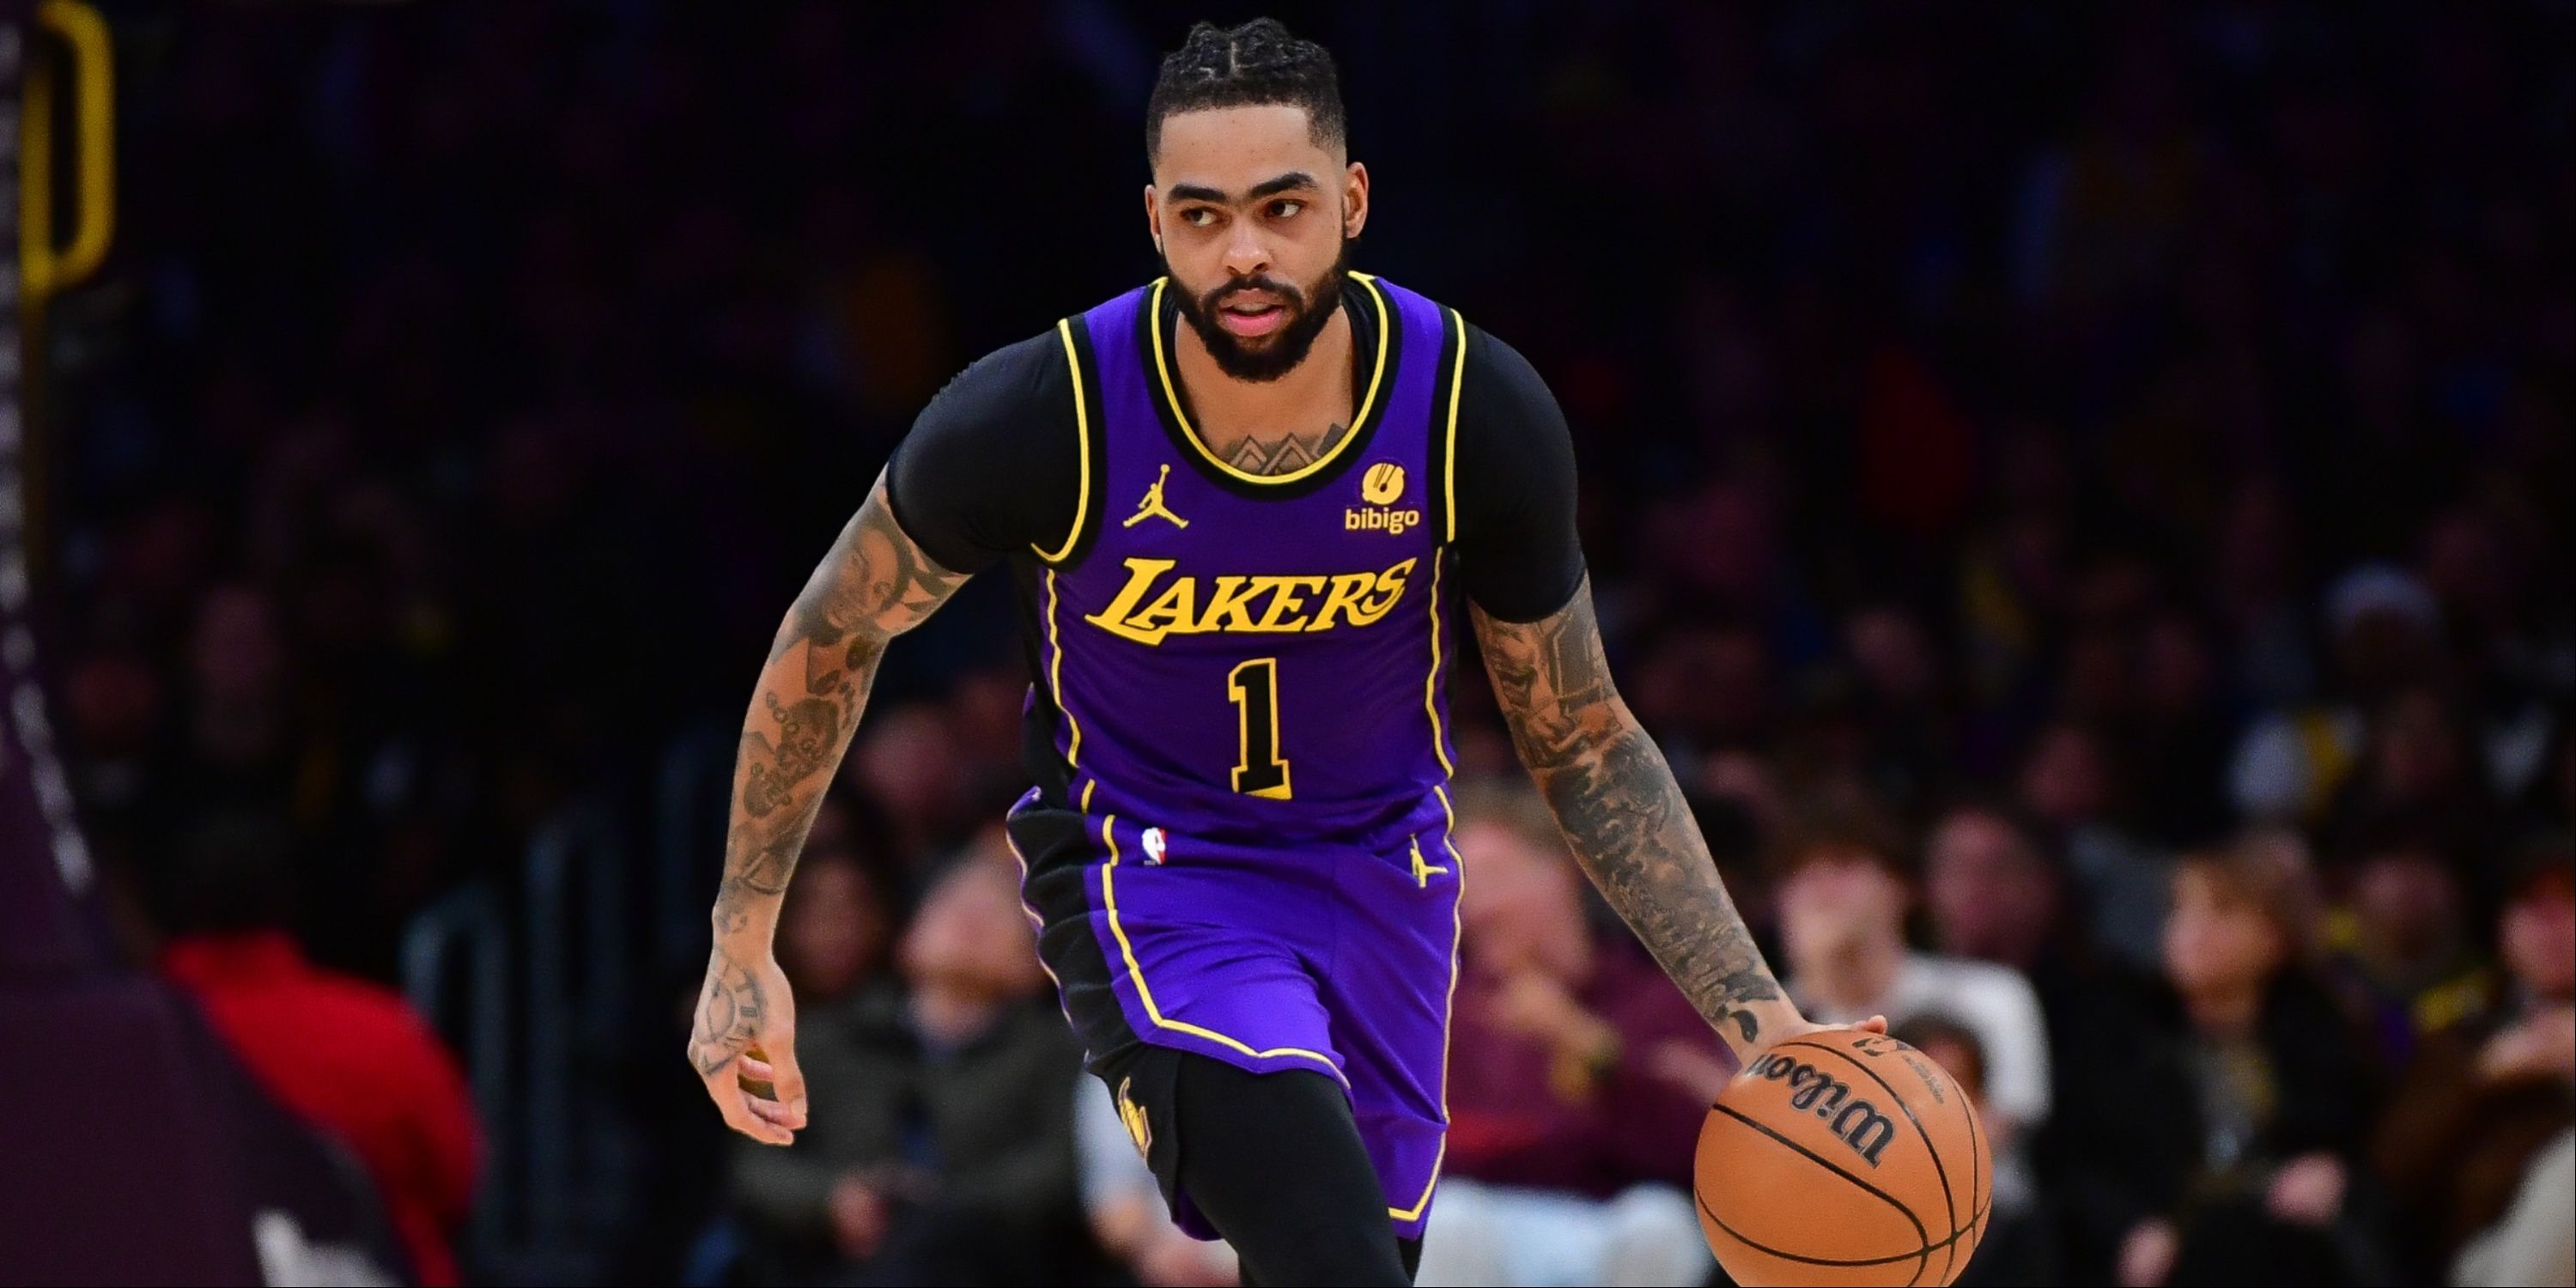 DAngelo Russell Sets the Los Angeles Lakers Single-Season Three-Point Record